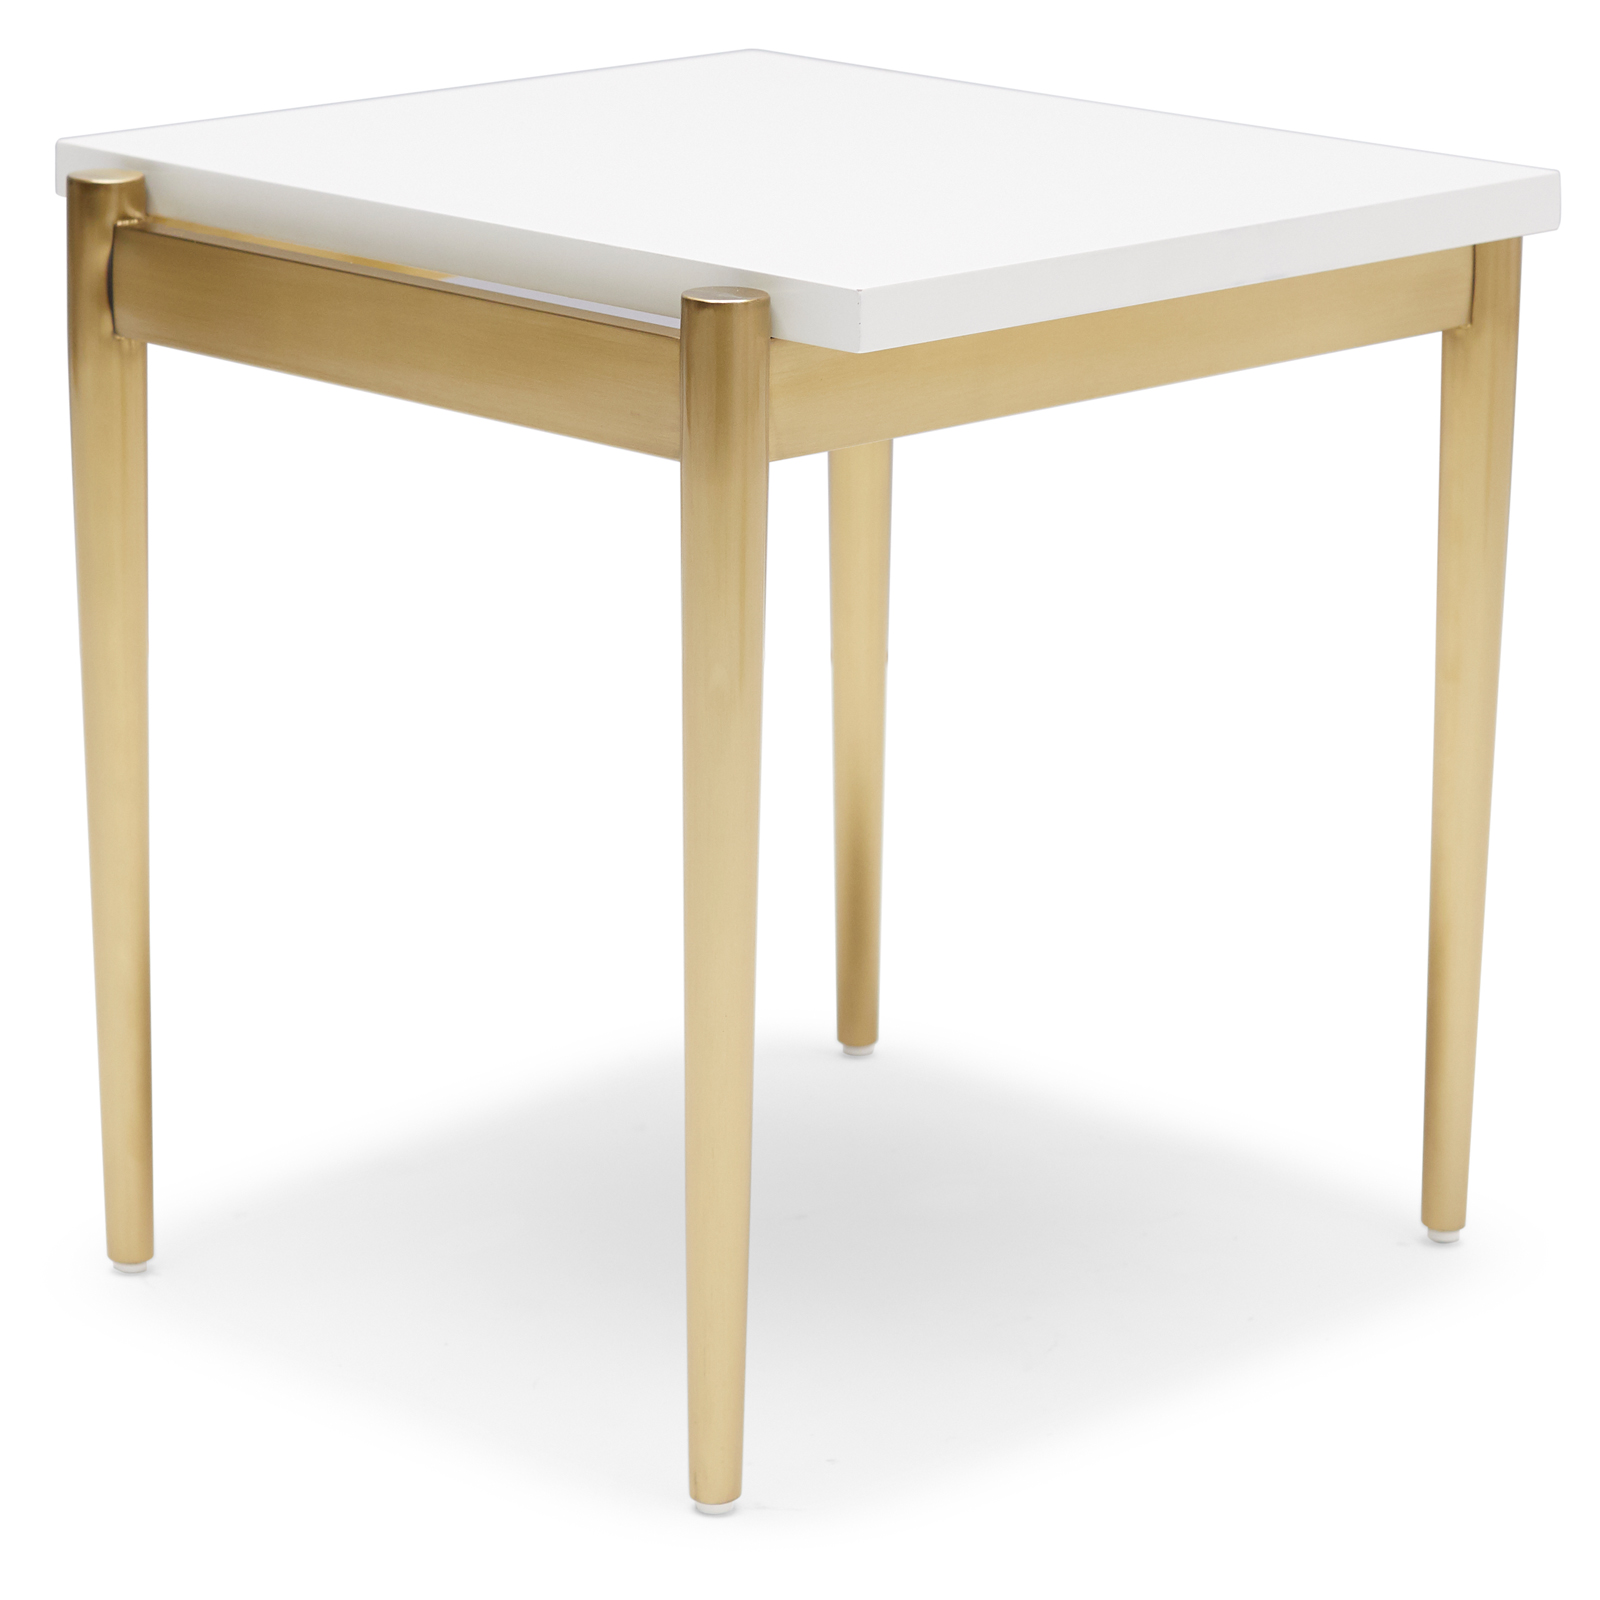 MoDRN Neo Luxury Dylan End Table - image 2 of 7